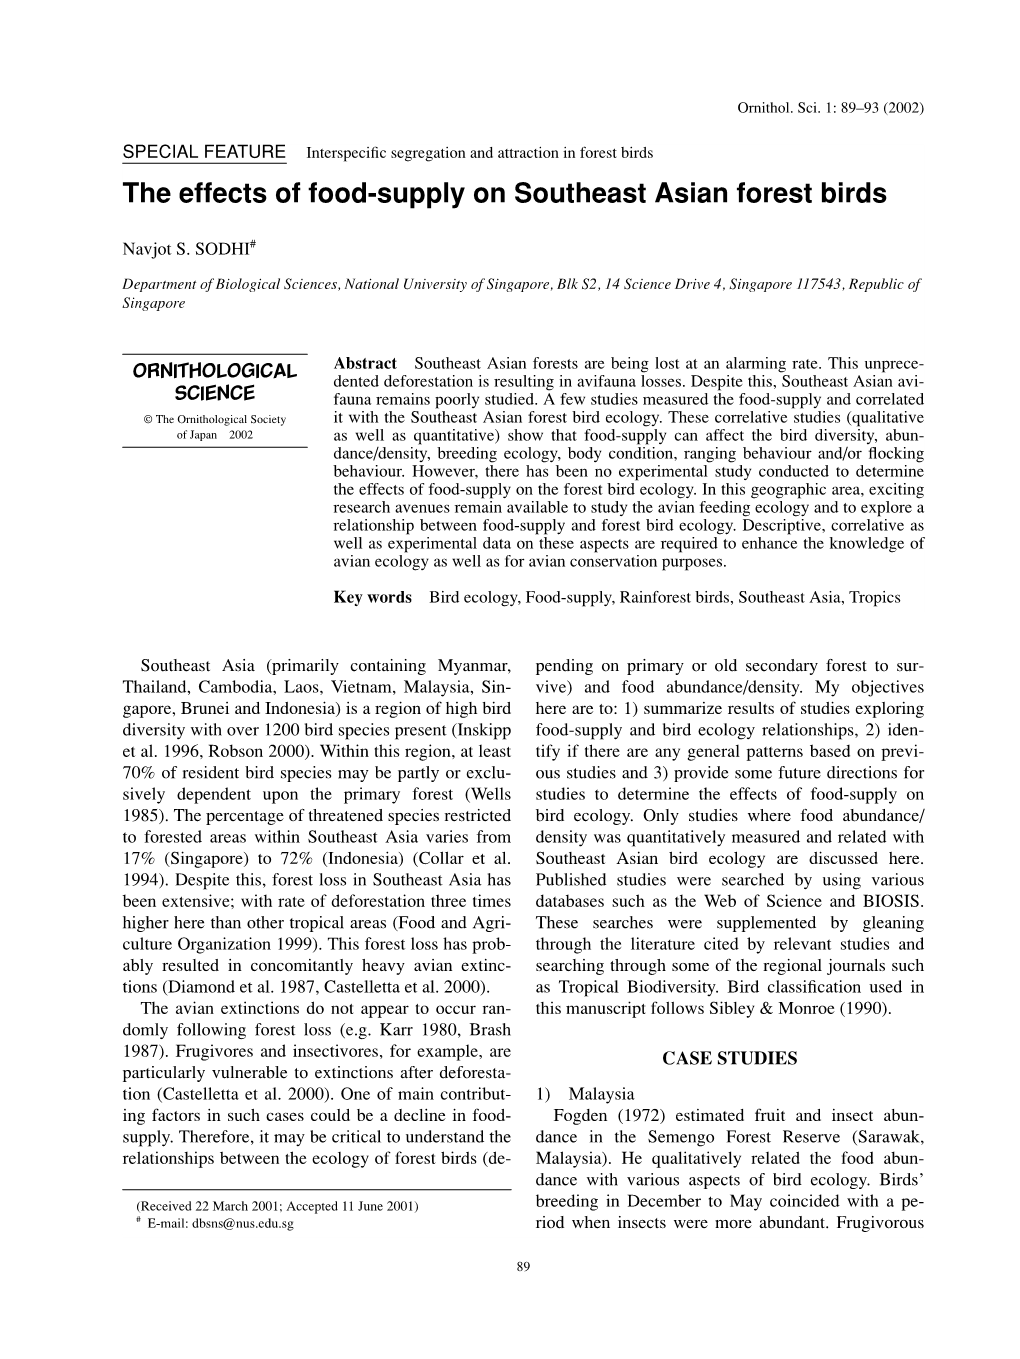 The Effects of Food-Supply on Southeast Asian Forest Birds